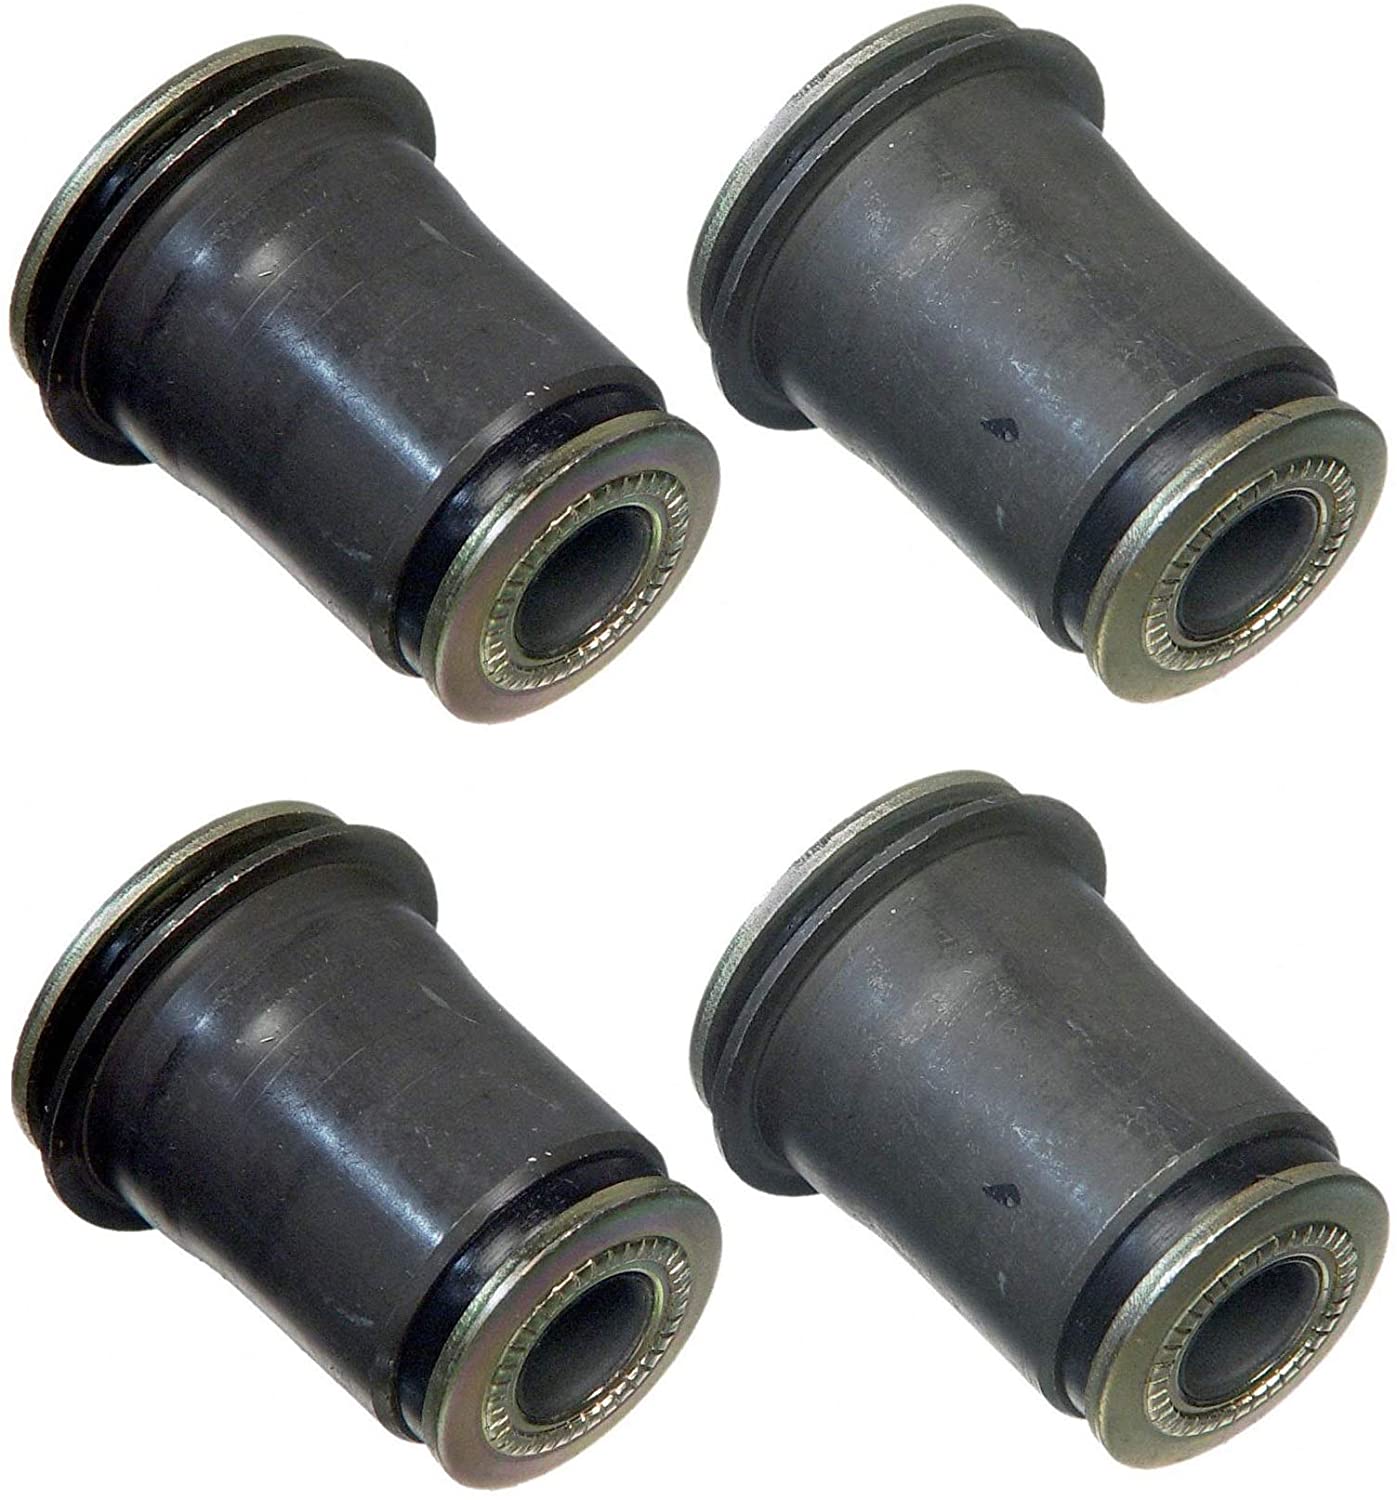 Pair Set Of 2 Front Lower Control Arm Bushing Kits For Toyota 4Runner 86-89